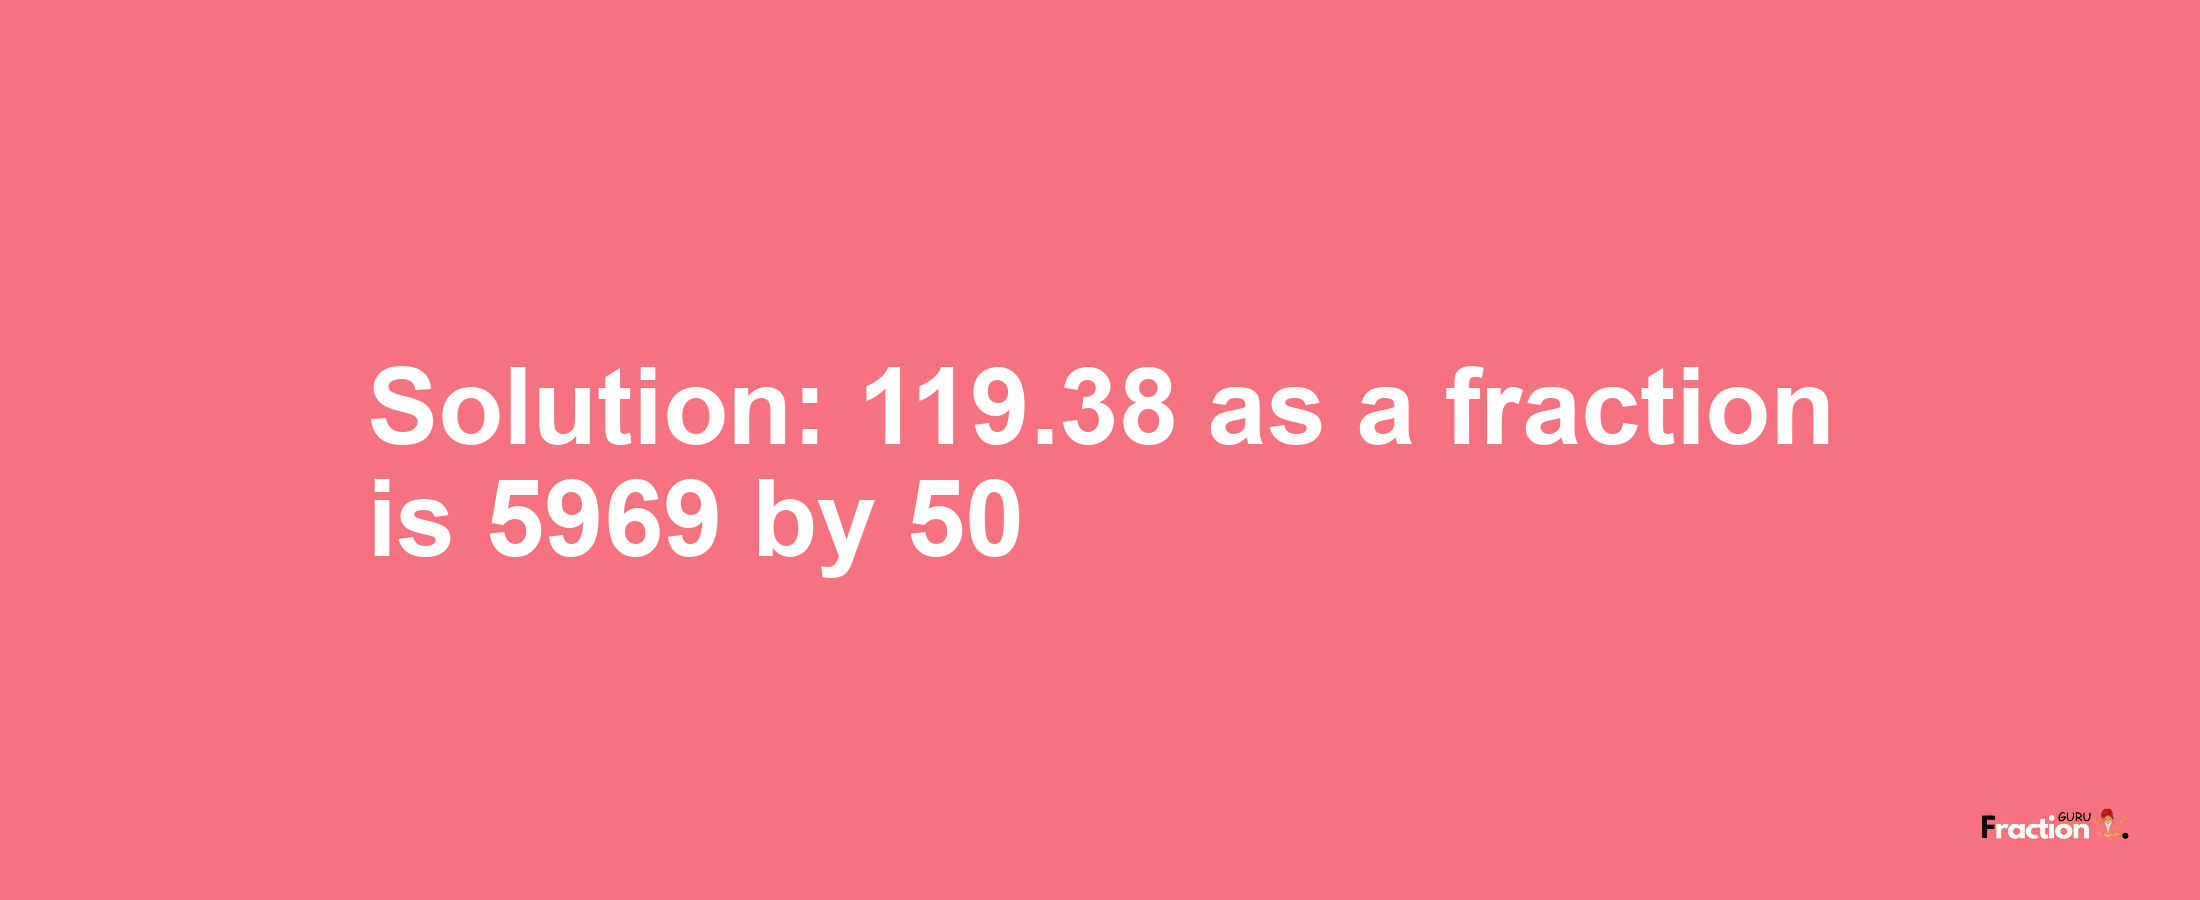 Solution:119.38 as a fraction is 5969/50